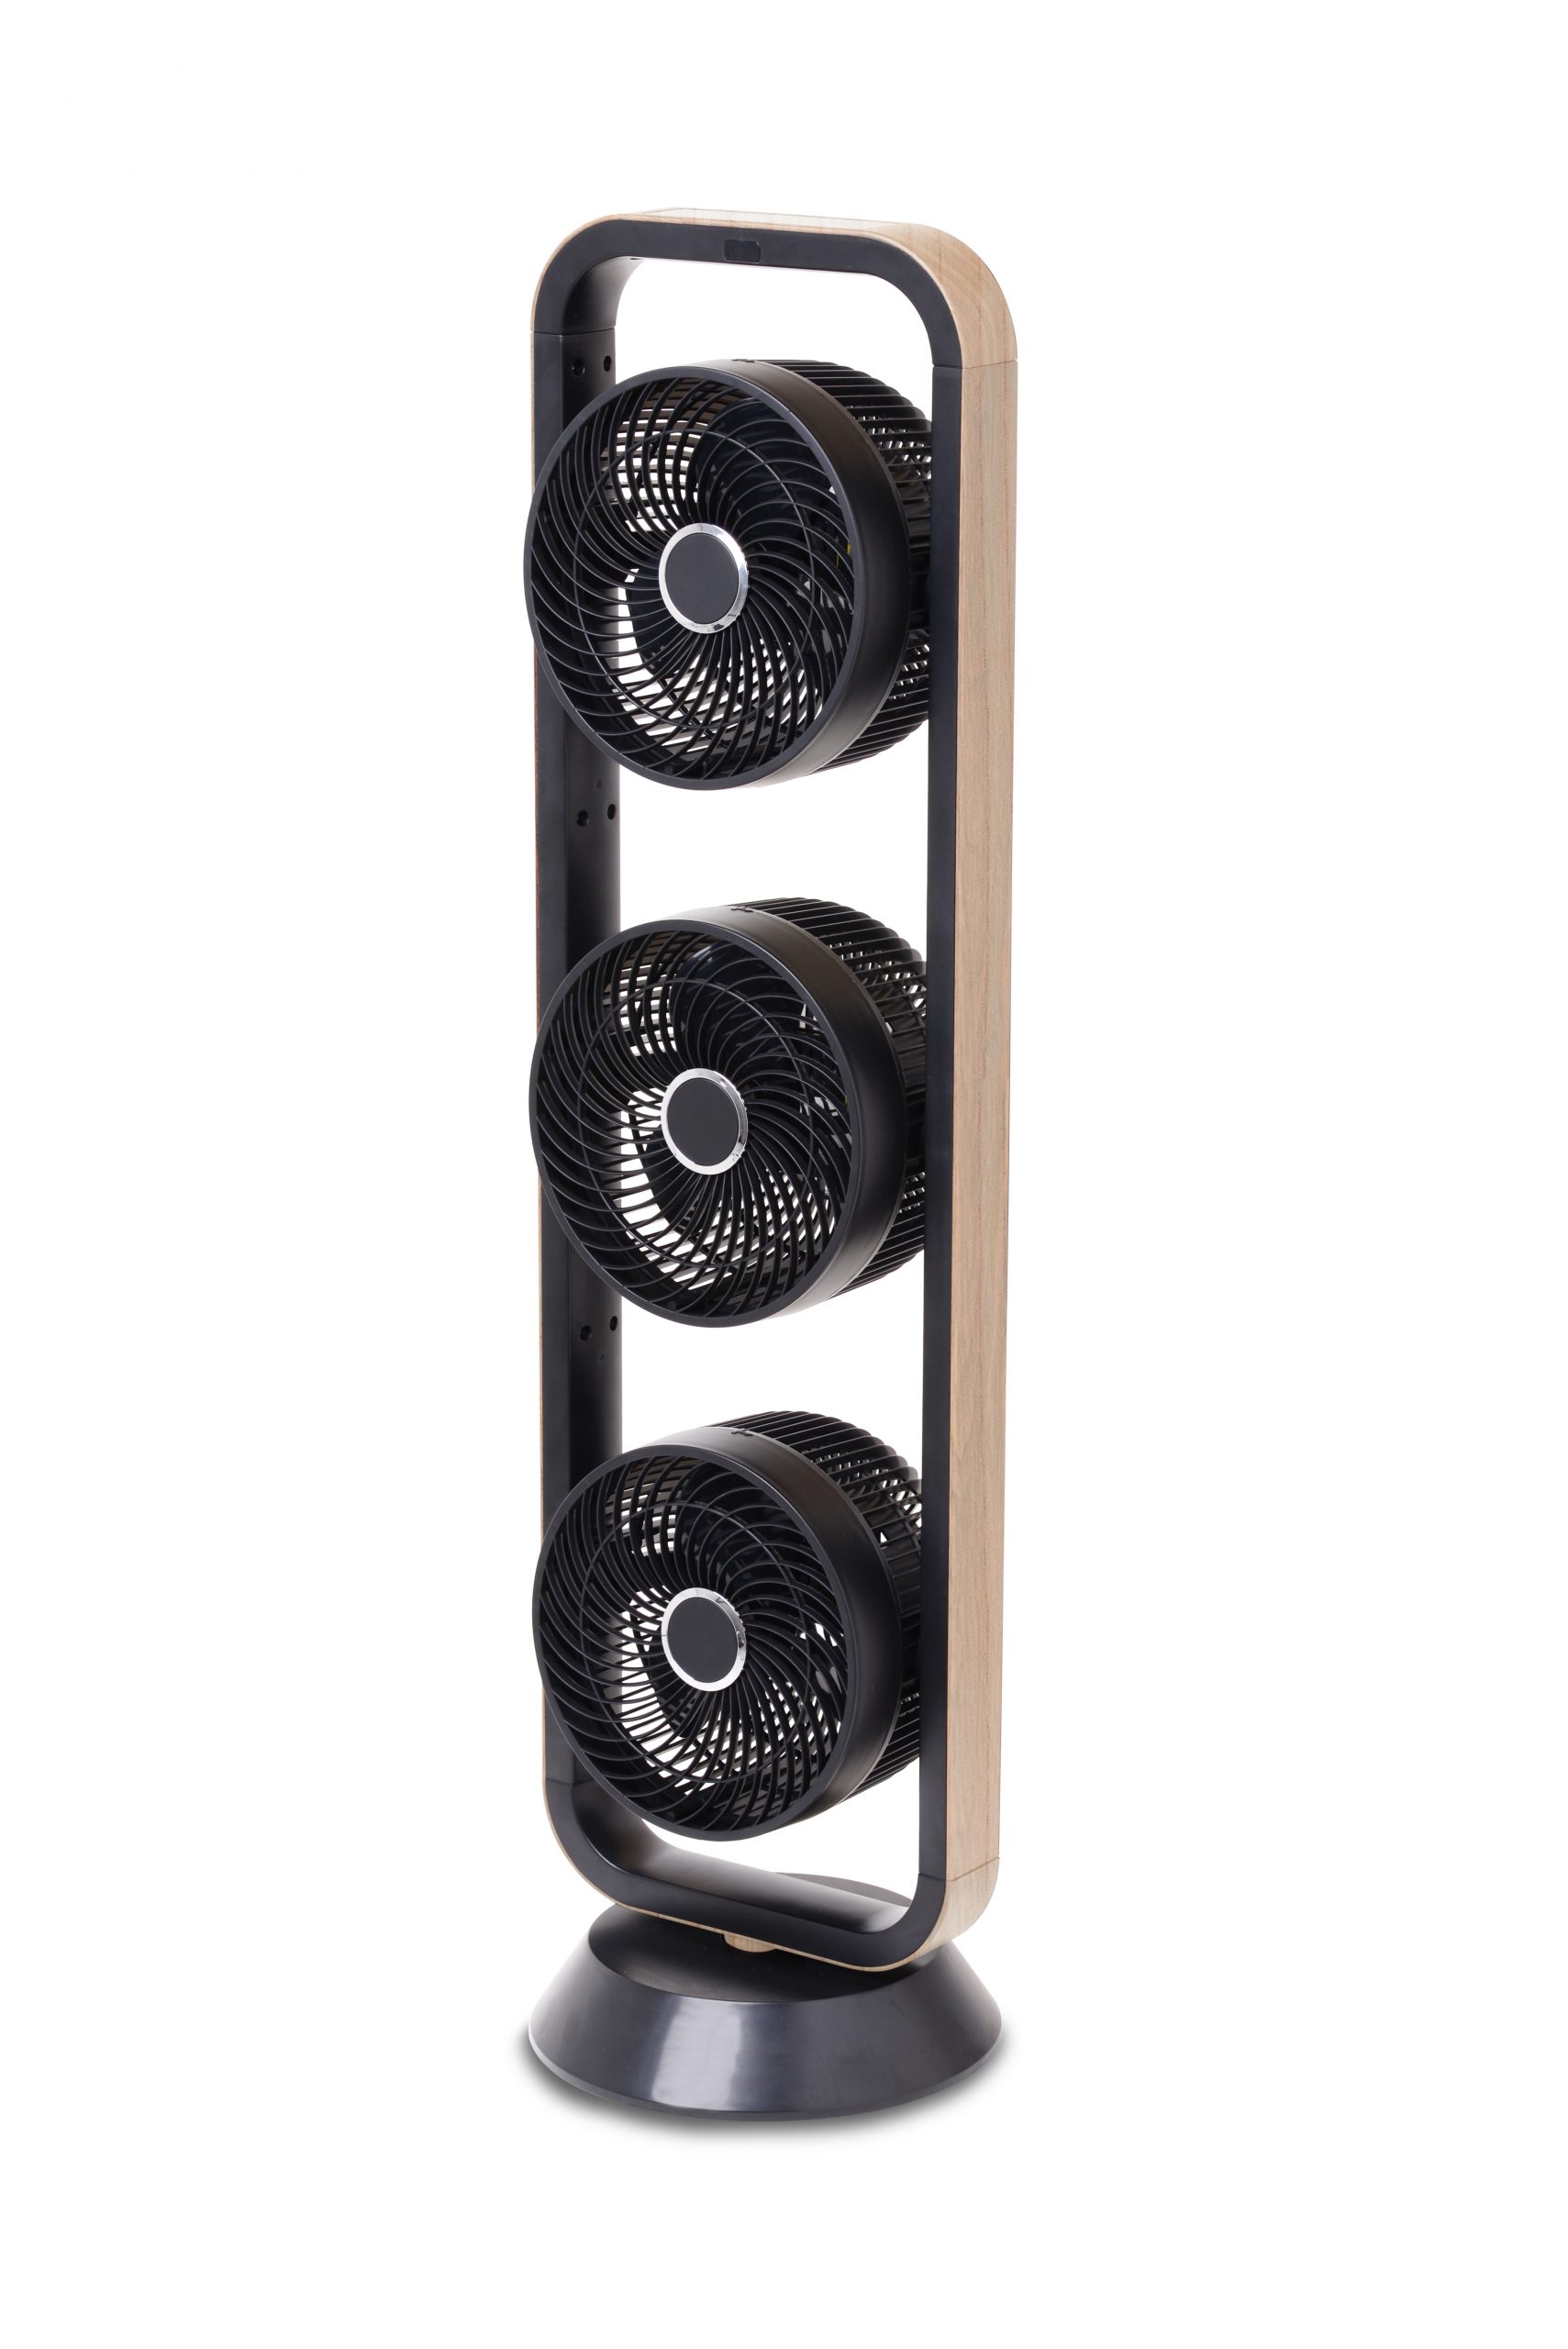 Tower Fans Goldair for size 4016 X 6016